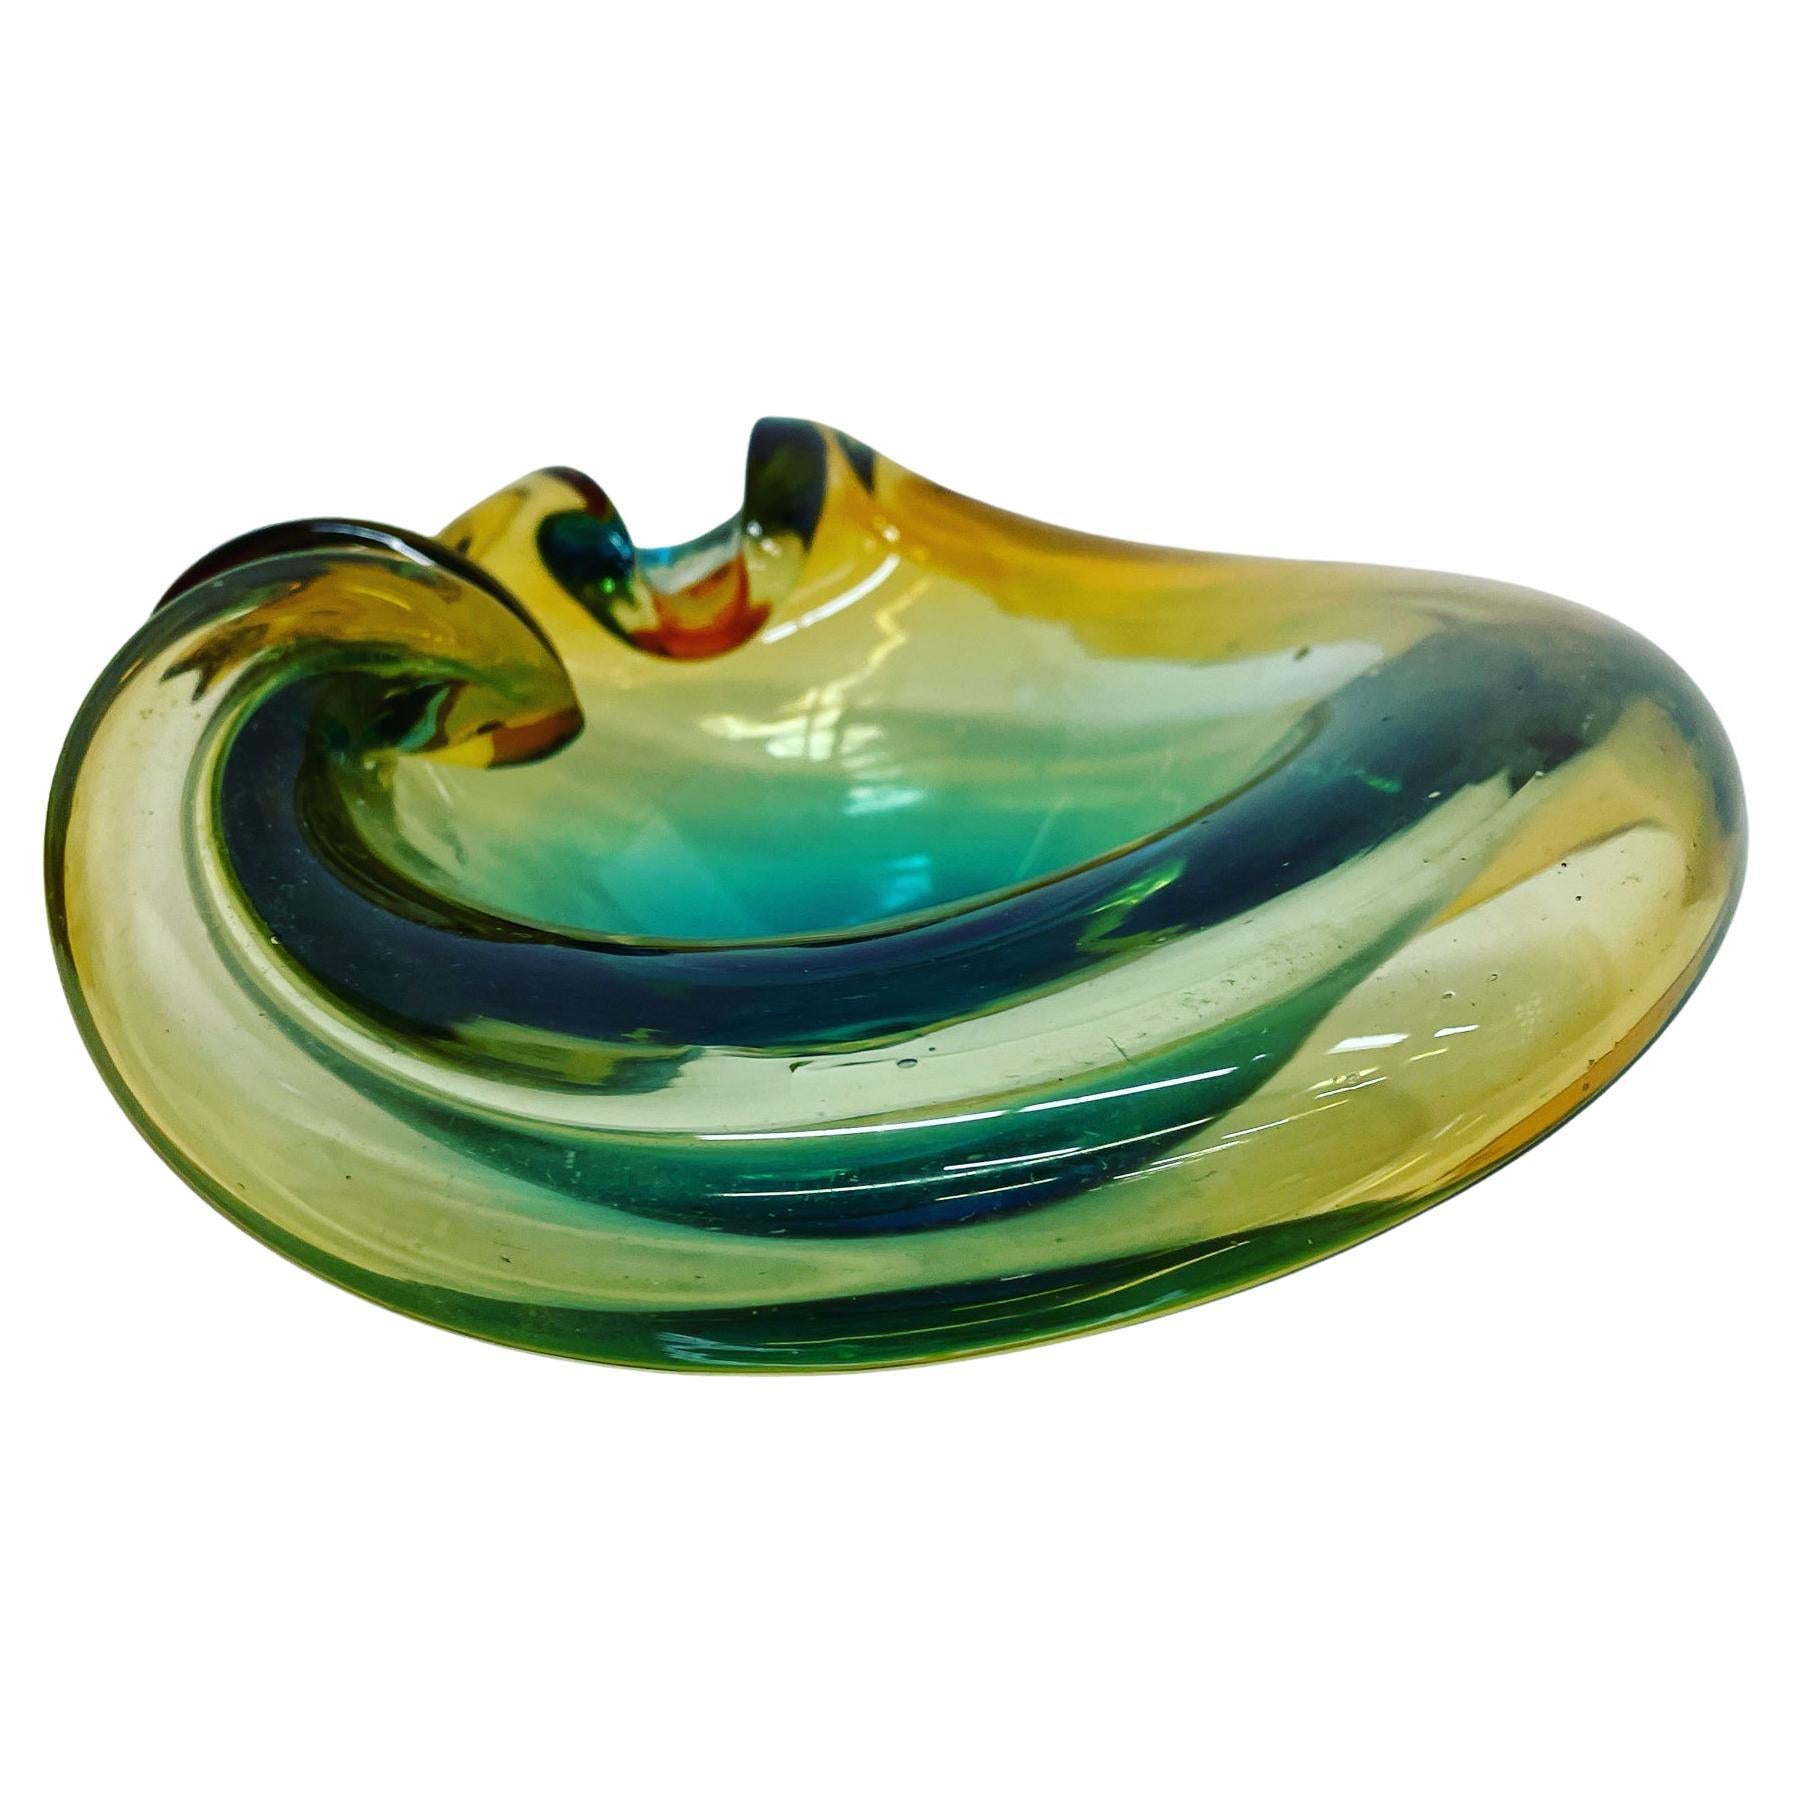 Swirling Color Curled Murano Sommerso Art Glass Ashtray Bowl Seguso Italy 1970s